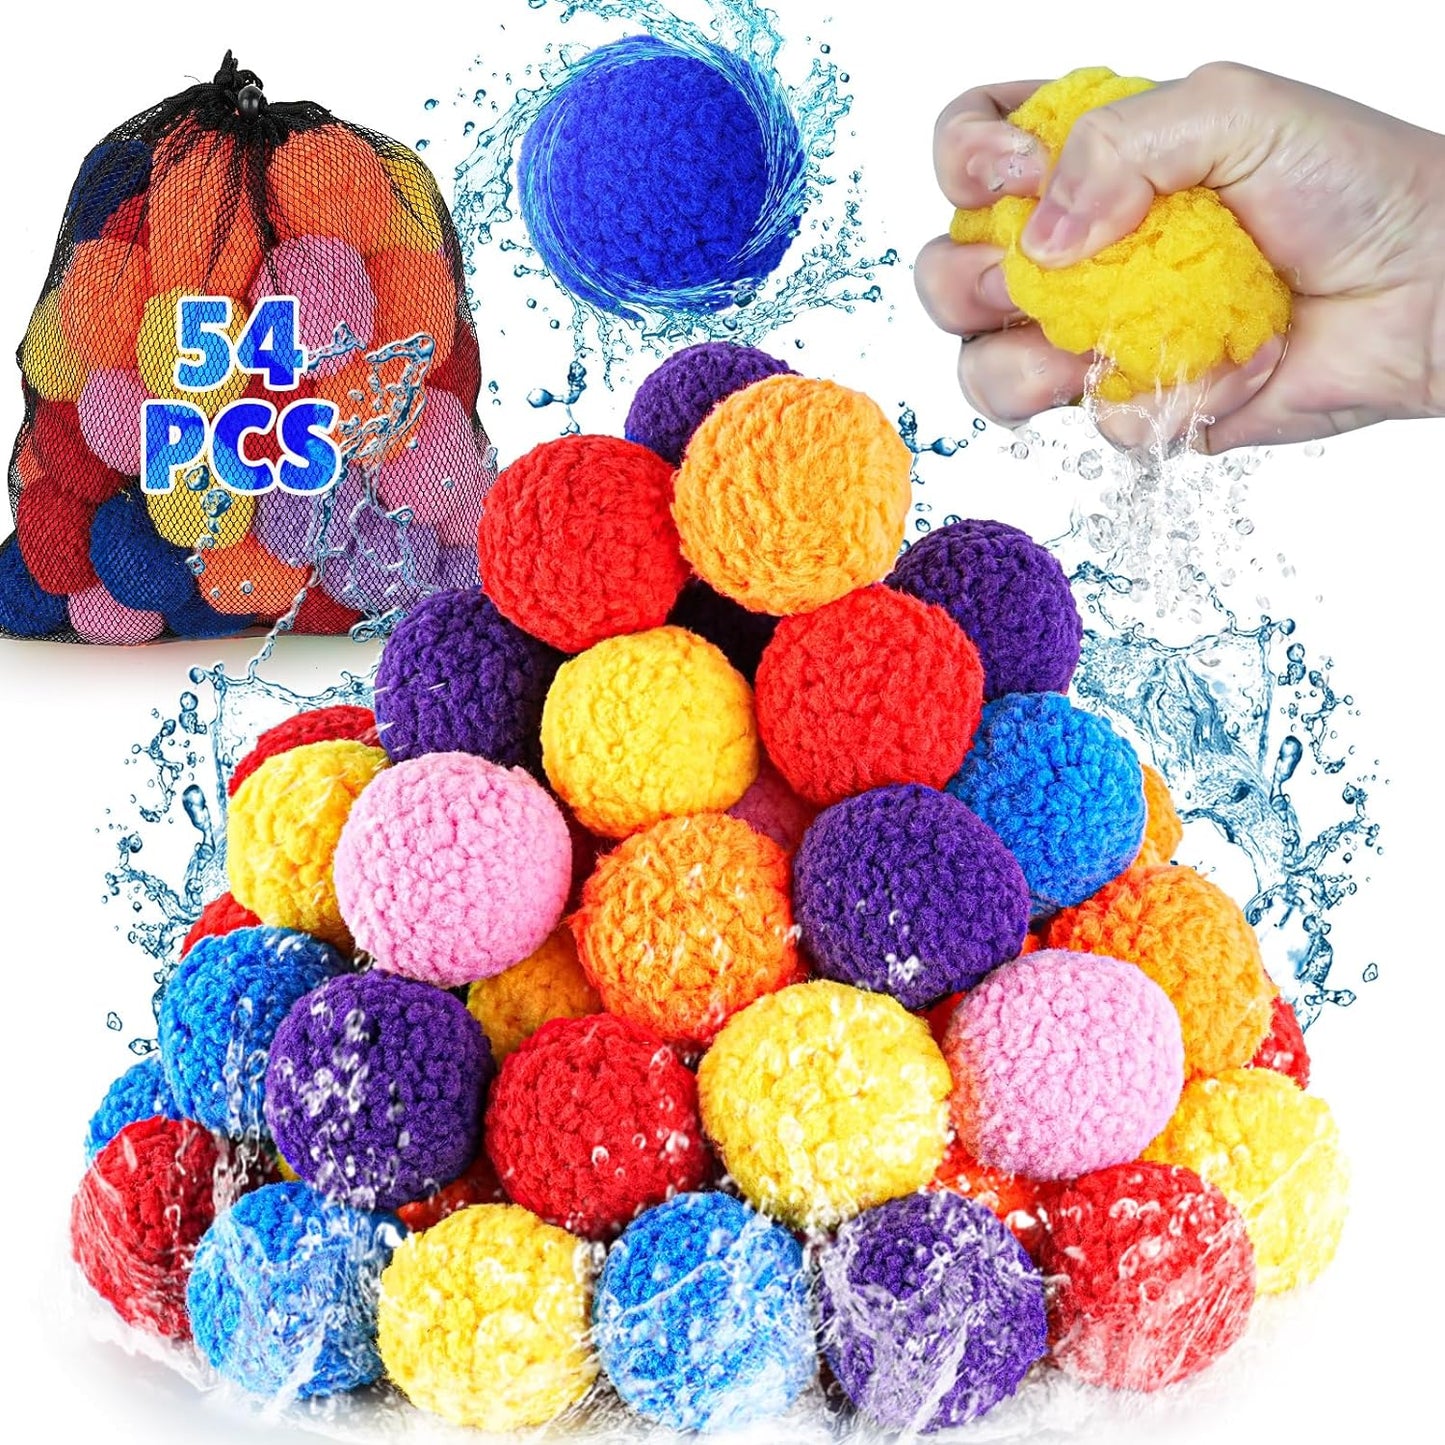 60 Pcs Water Balls Reusable Water Balloons for Kids Outdoor Games & Toys, Summer Water Toys outside Water Play Splash Balls for Pool Backyard Lawn Beach Fun Games